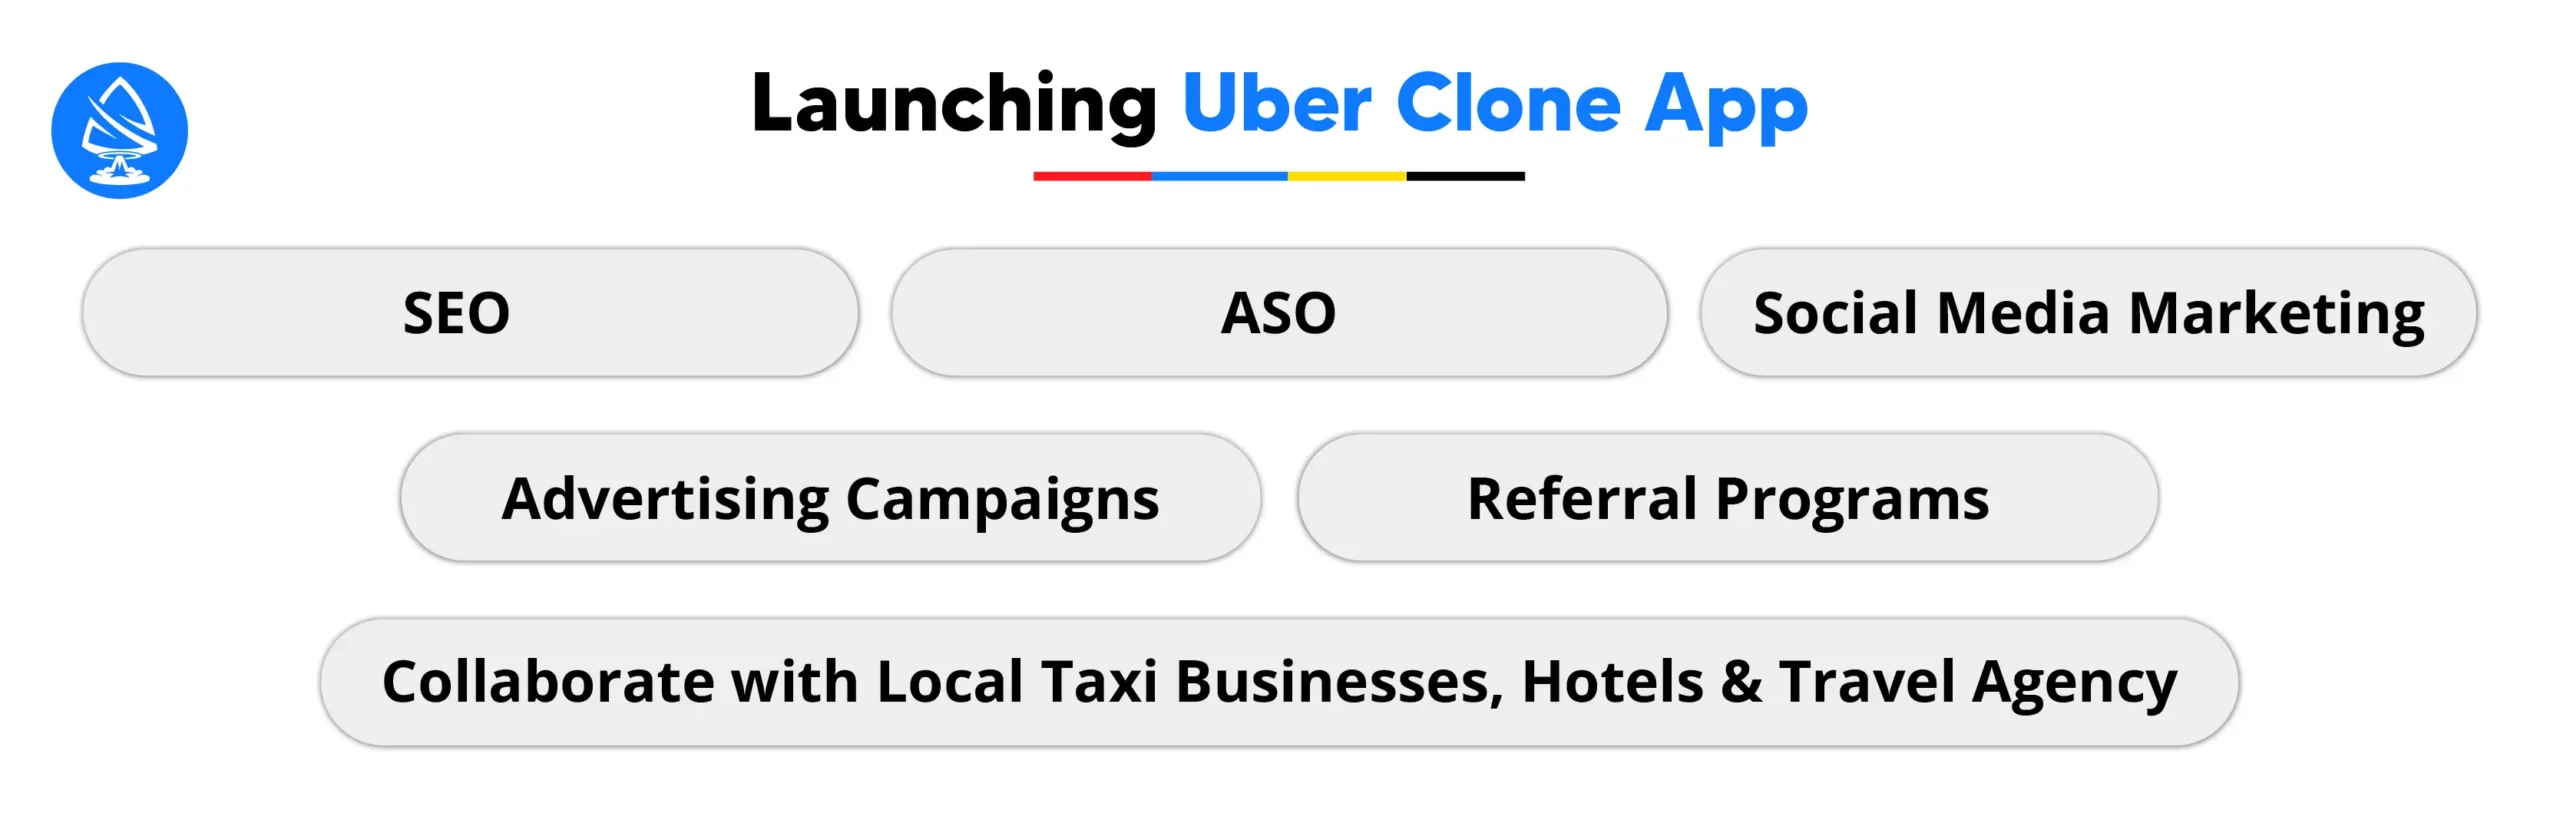 Launching and Marketing Your Uber Clone App